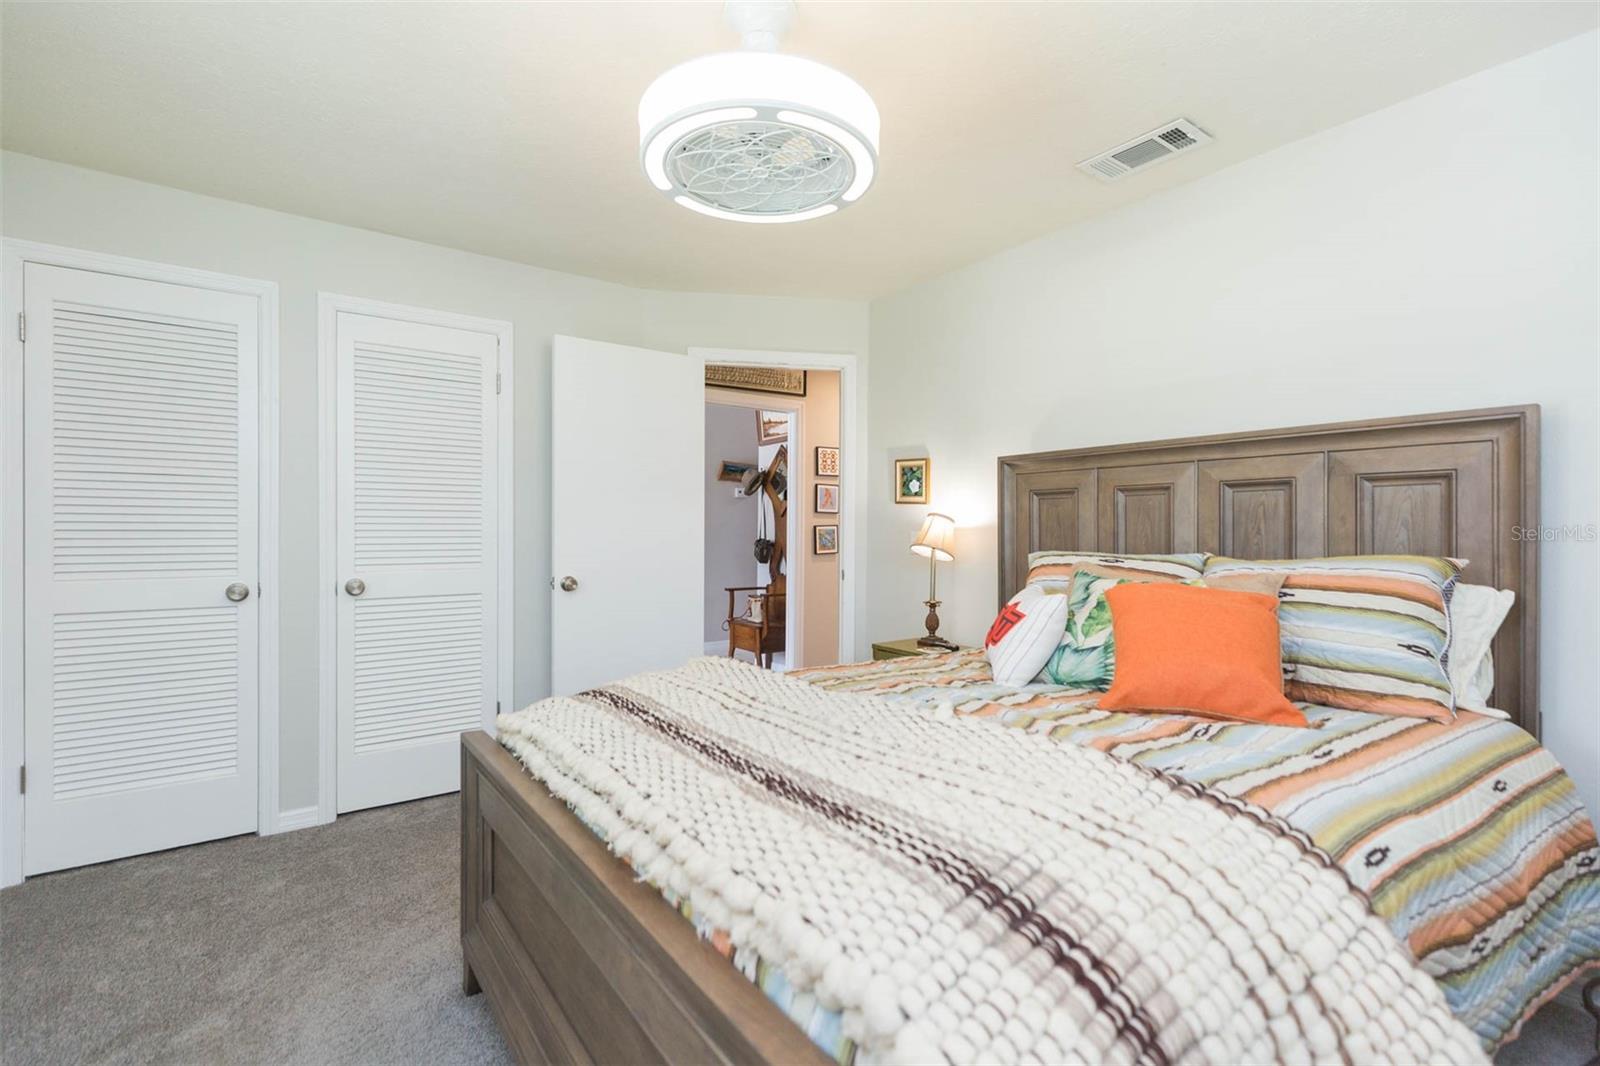 Two bedrooms share a full and renovated bath. Both rooms are large with closets.